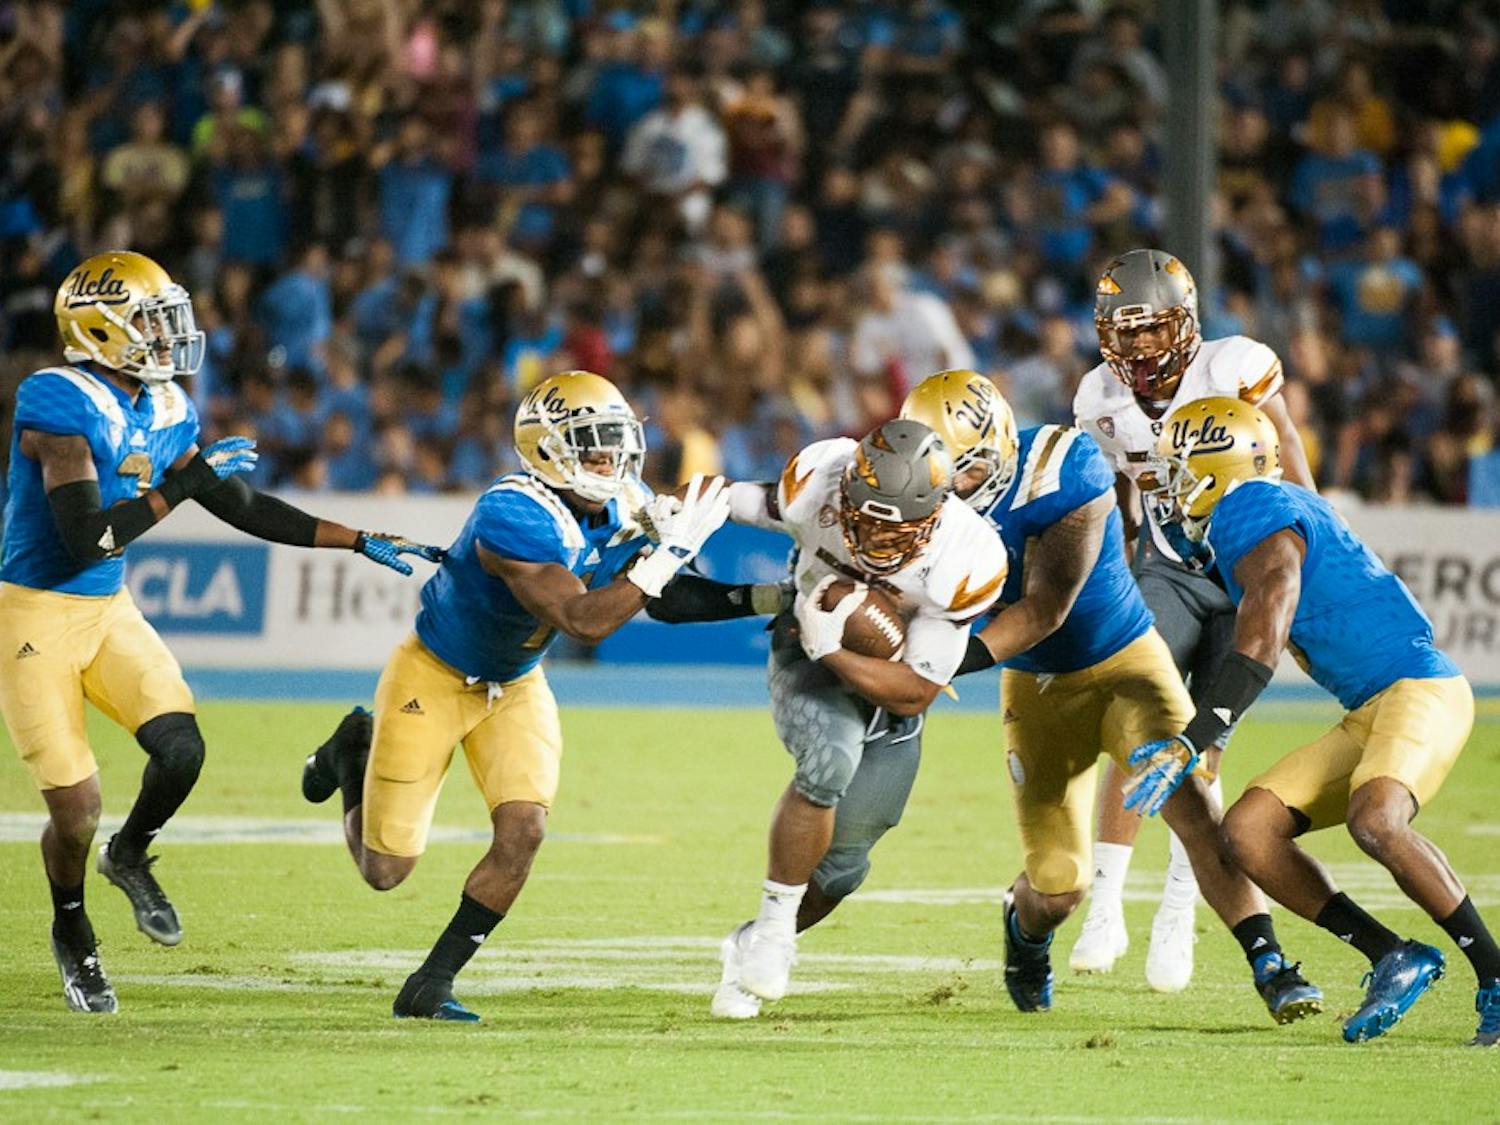 Sophomore running back Demario Richard (4) tries to escape UCLA tacklers on Saturday, Oct. 3, 2015, at Rose Bowl Stadium in Pasadena, Calif. The Sun Devils defeated the Bruins 38-23.